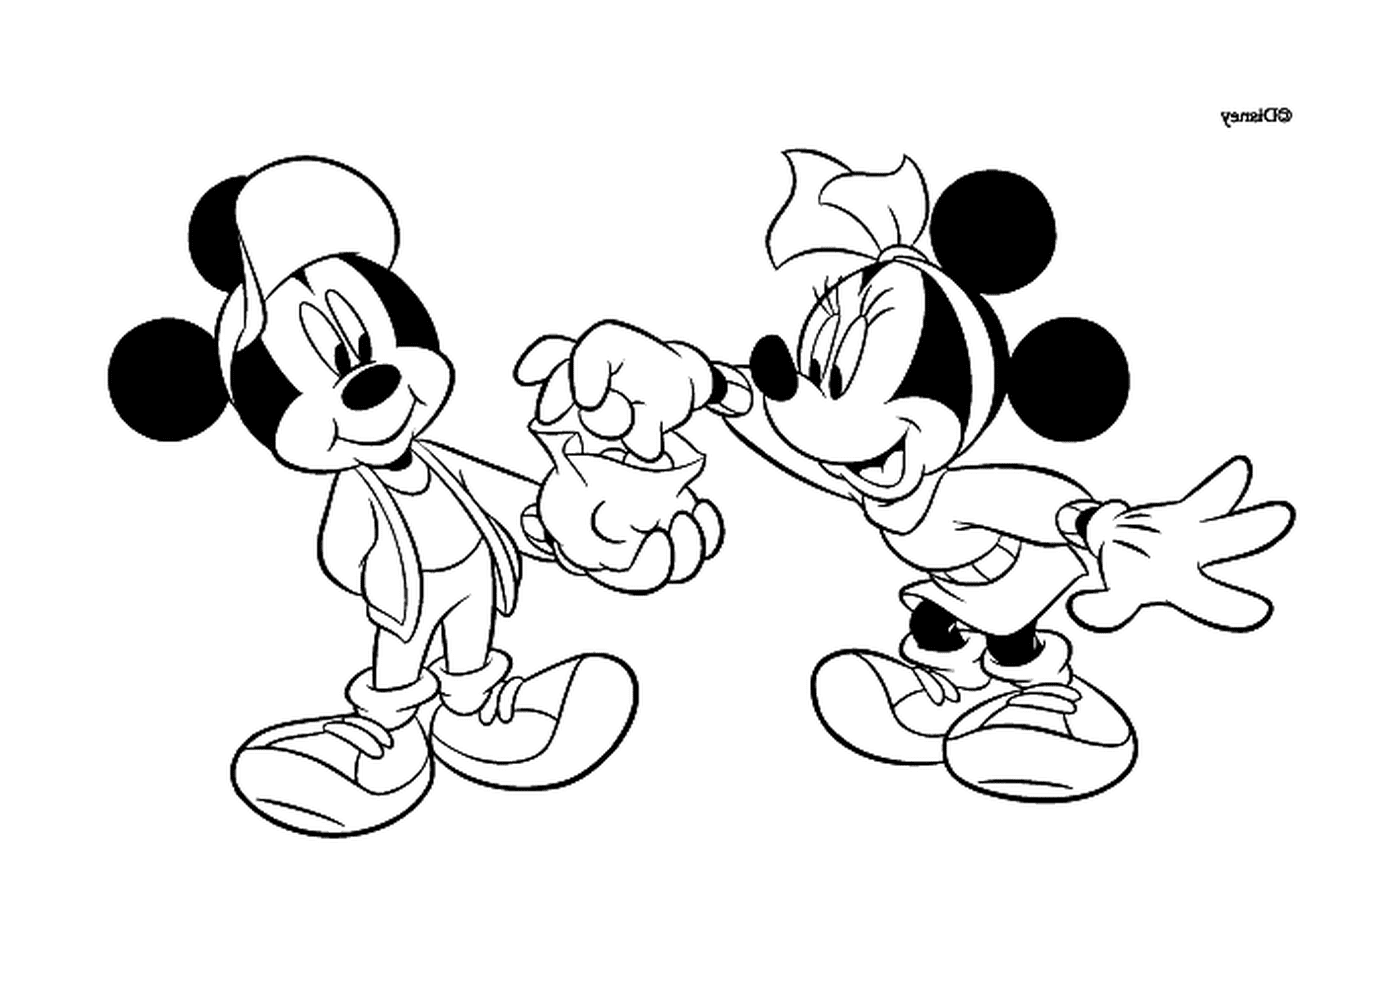  Mickey offers candy to Minnie 